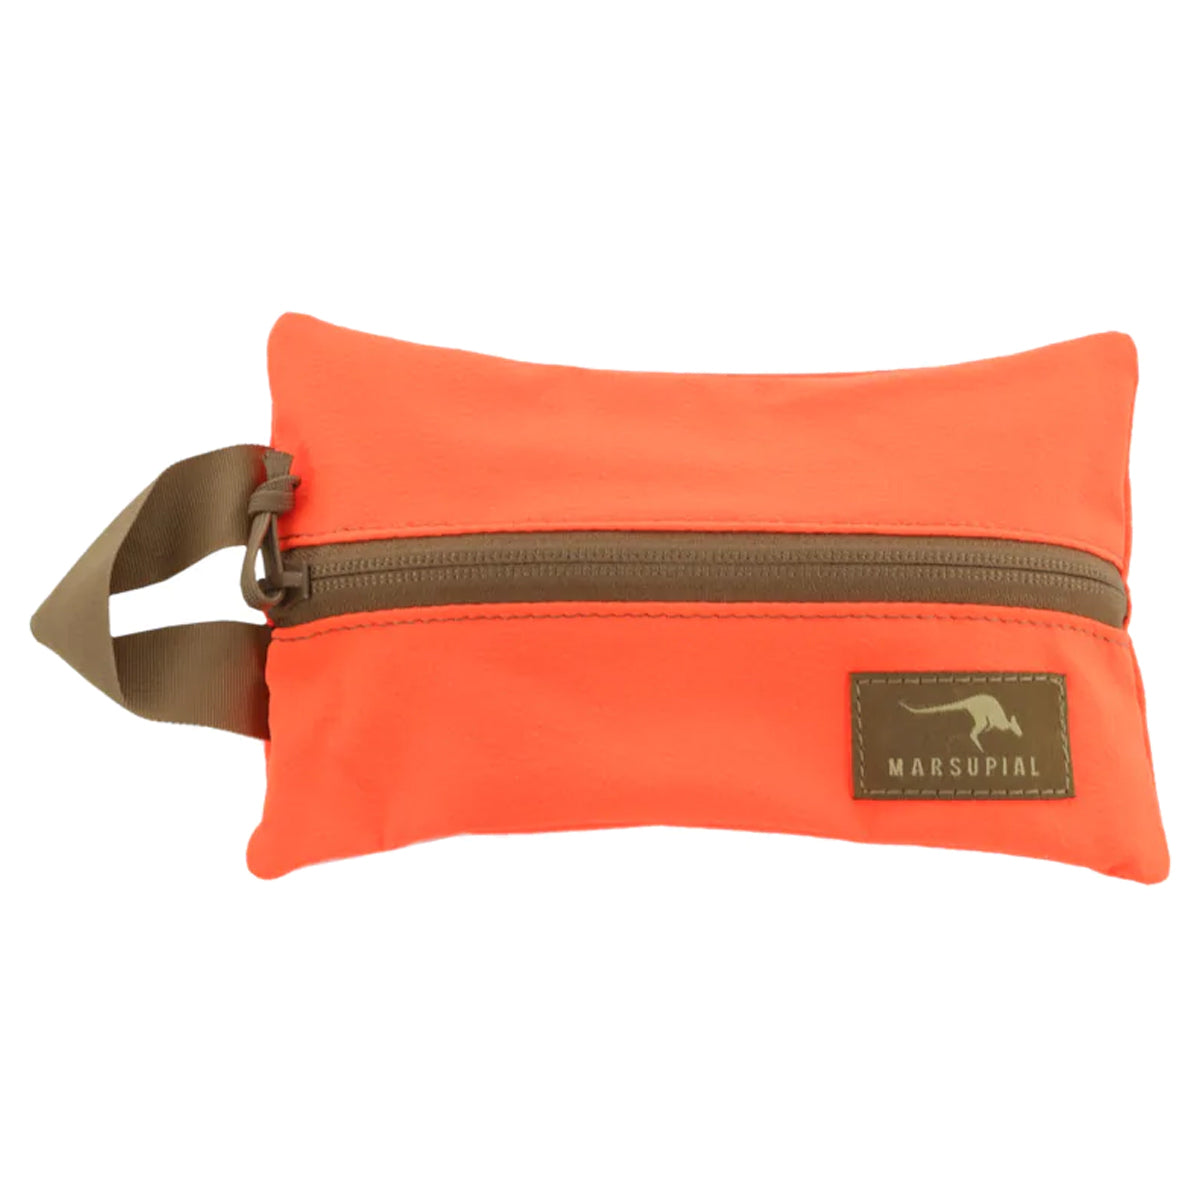 Marsupial Gear Stretch Zipperoo Pouch in  by GOHUNT | Marsupial Gear - GOHUNT Shop